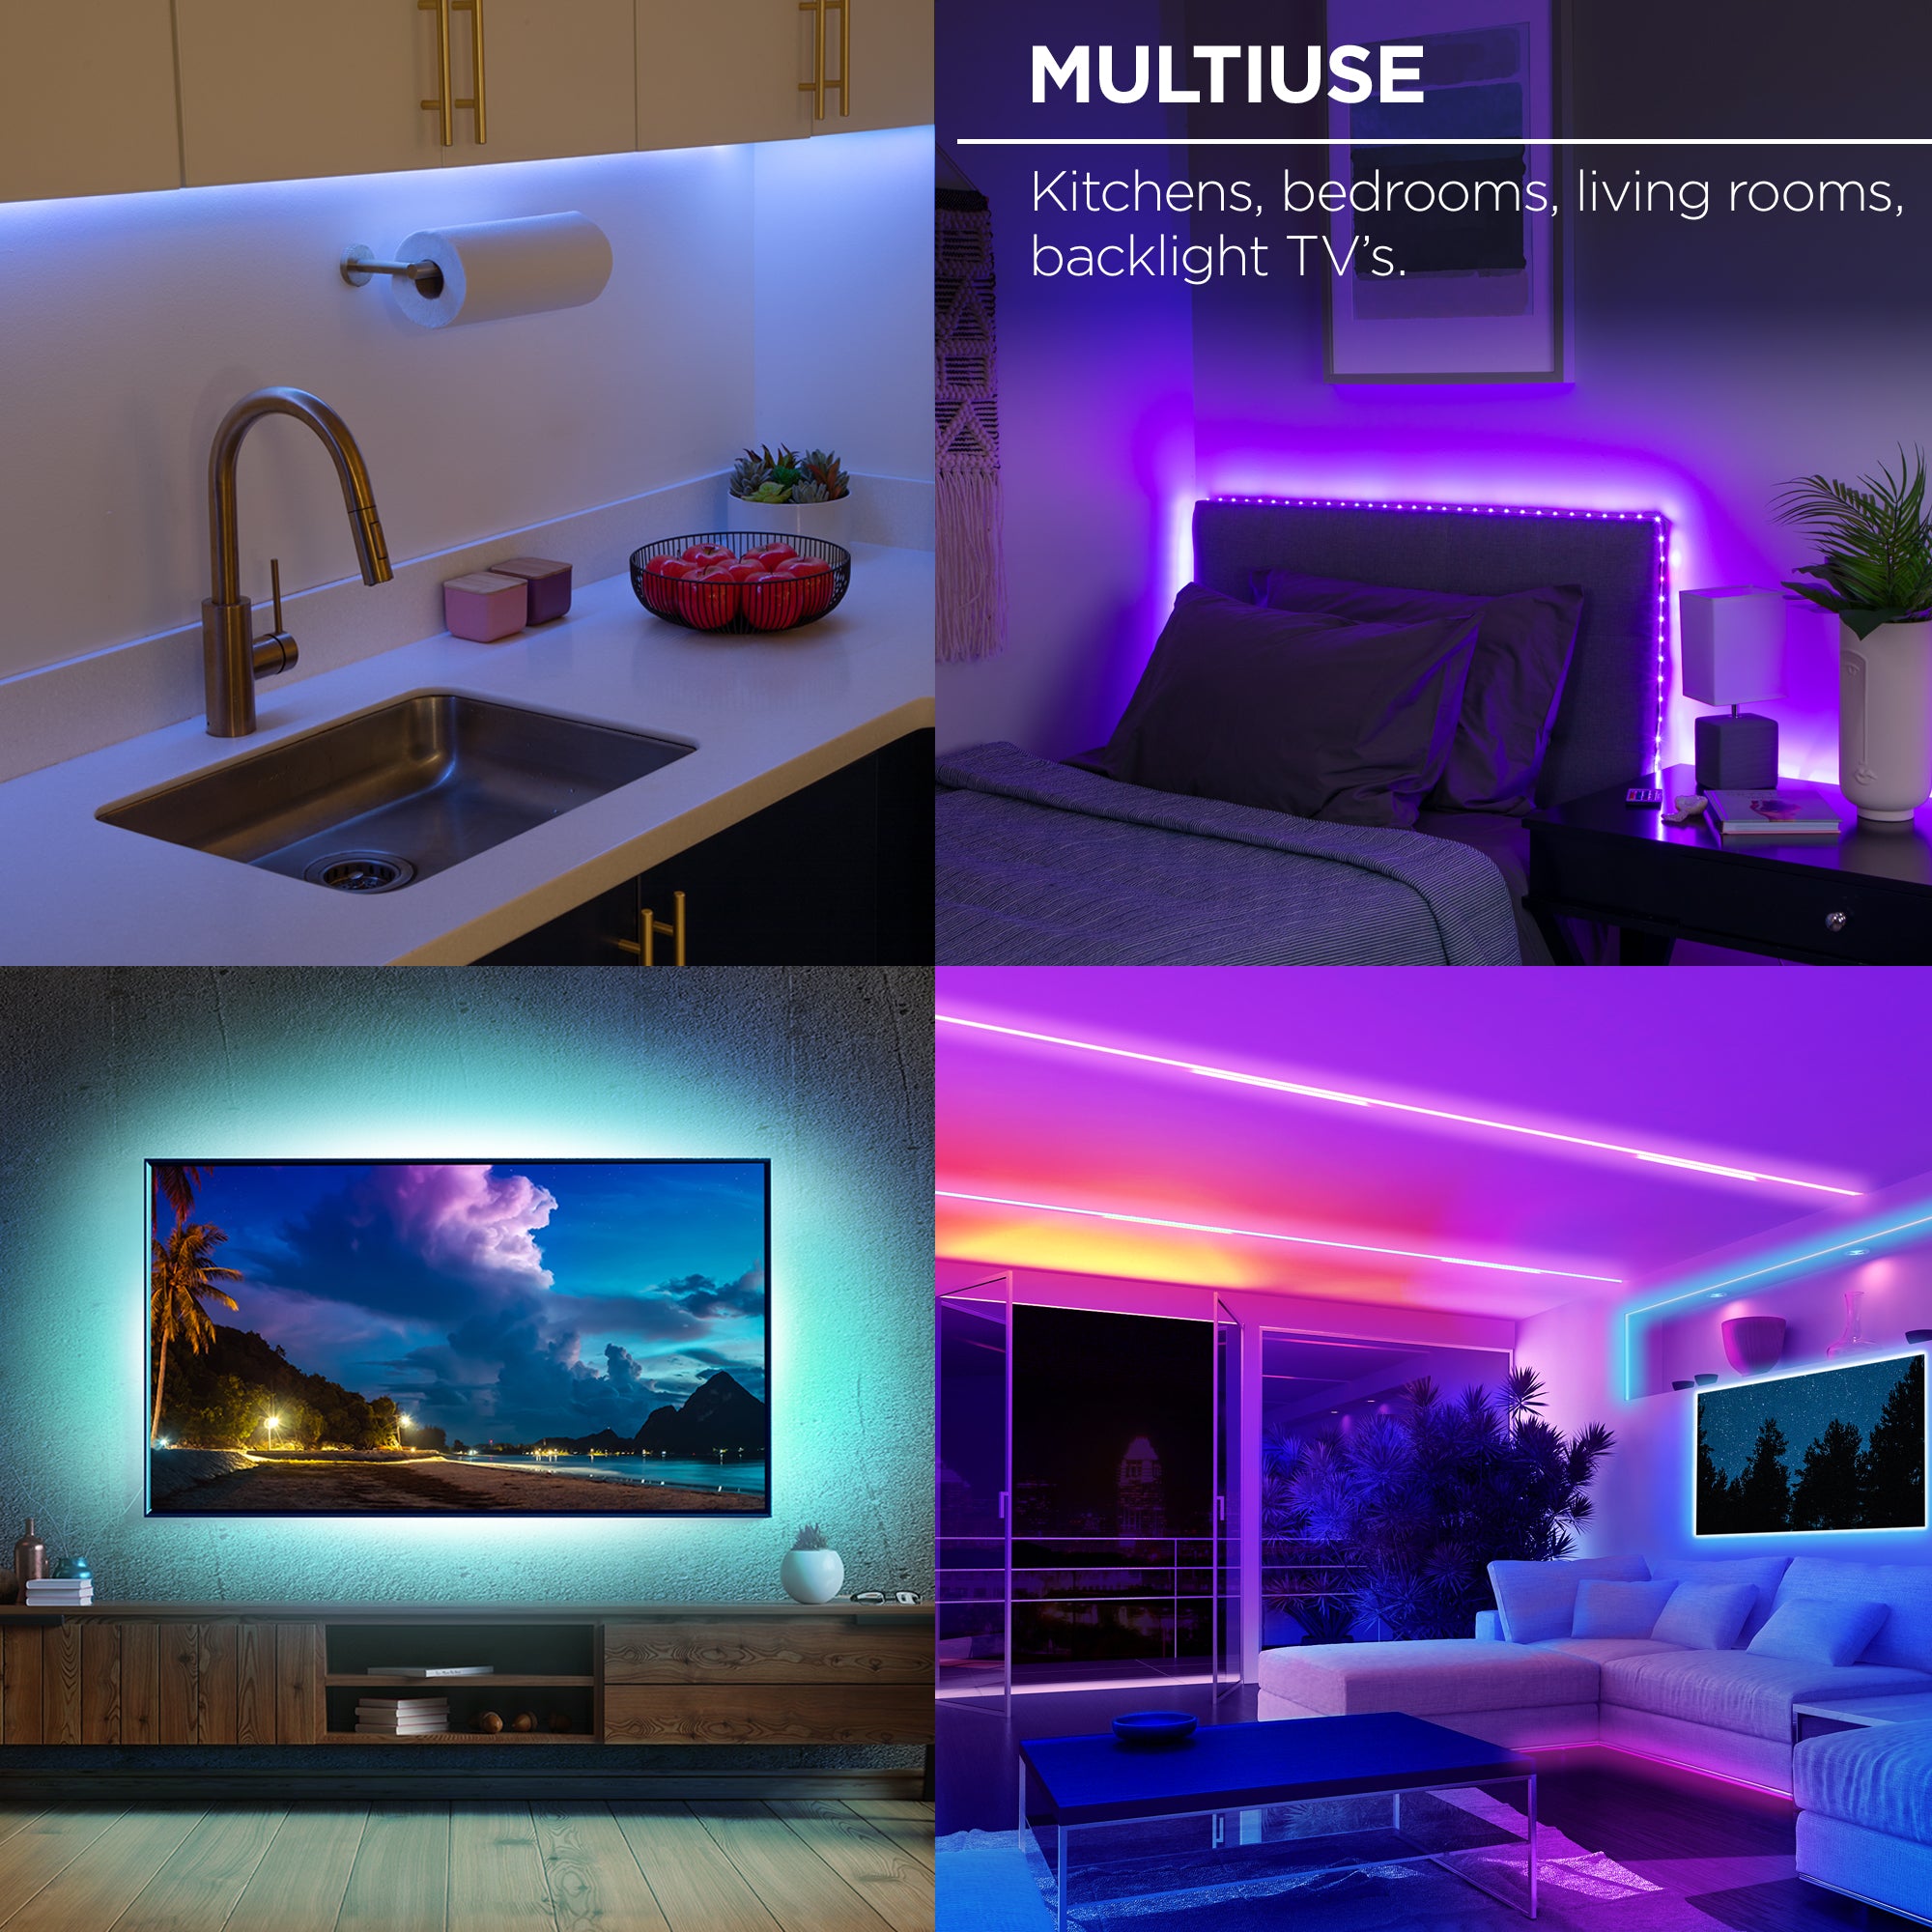 Connect Smart LED Strip Light 5m - Connect SmartHome